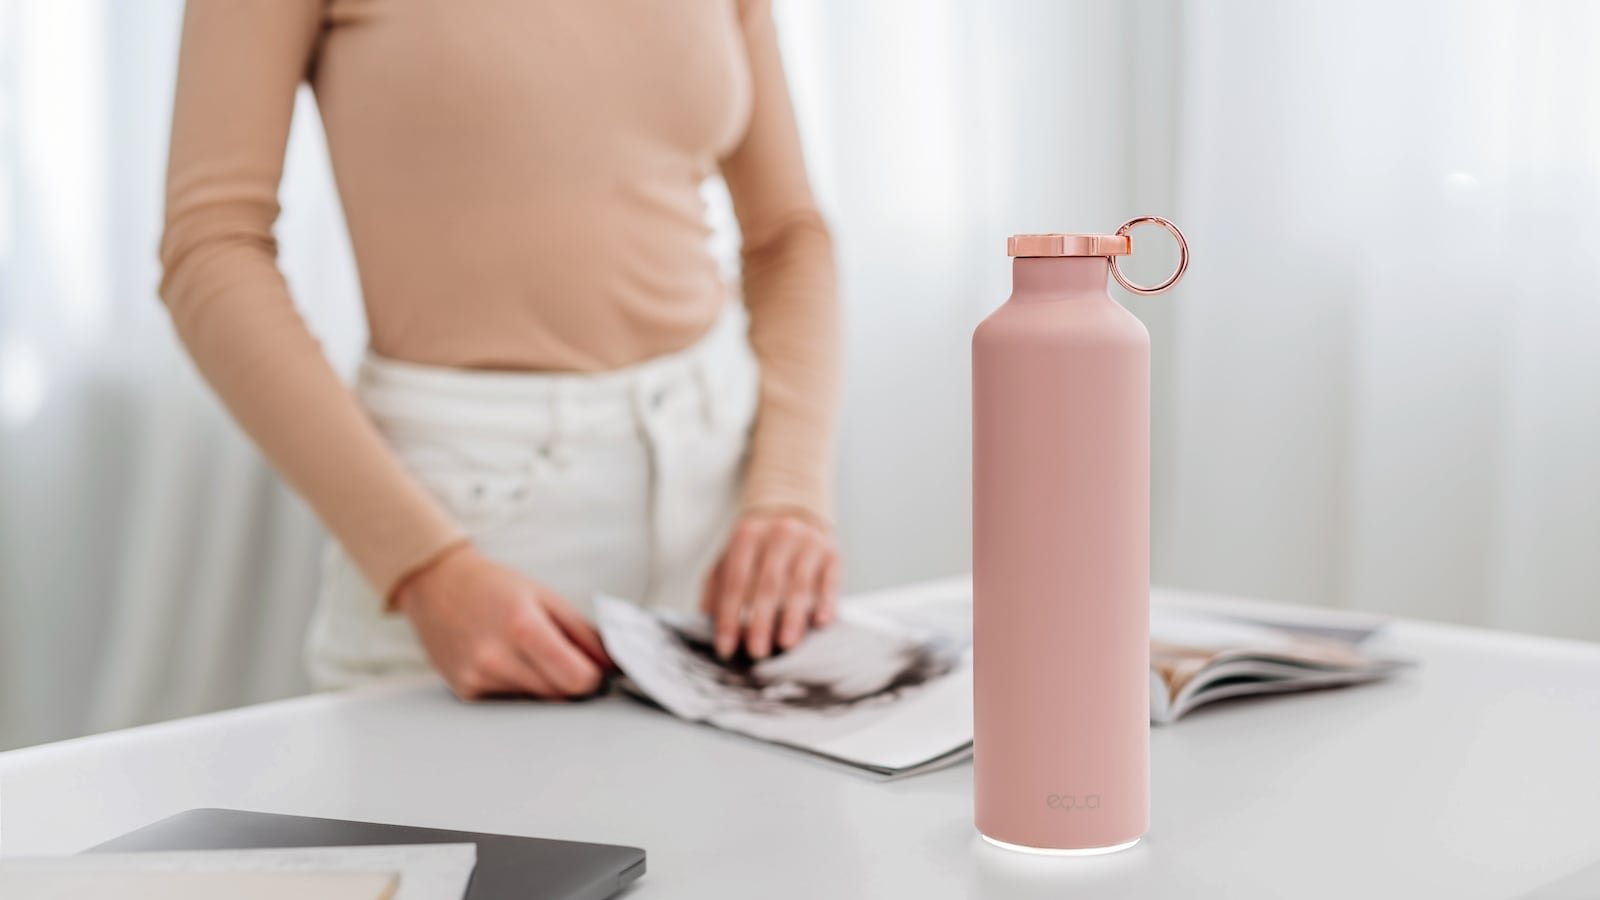 Equa Smart Hydration Reminder Water Bottle calculates your optimal water intake